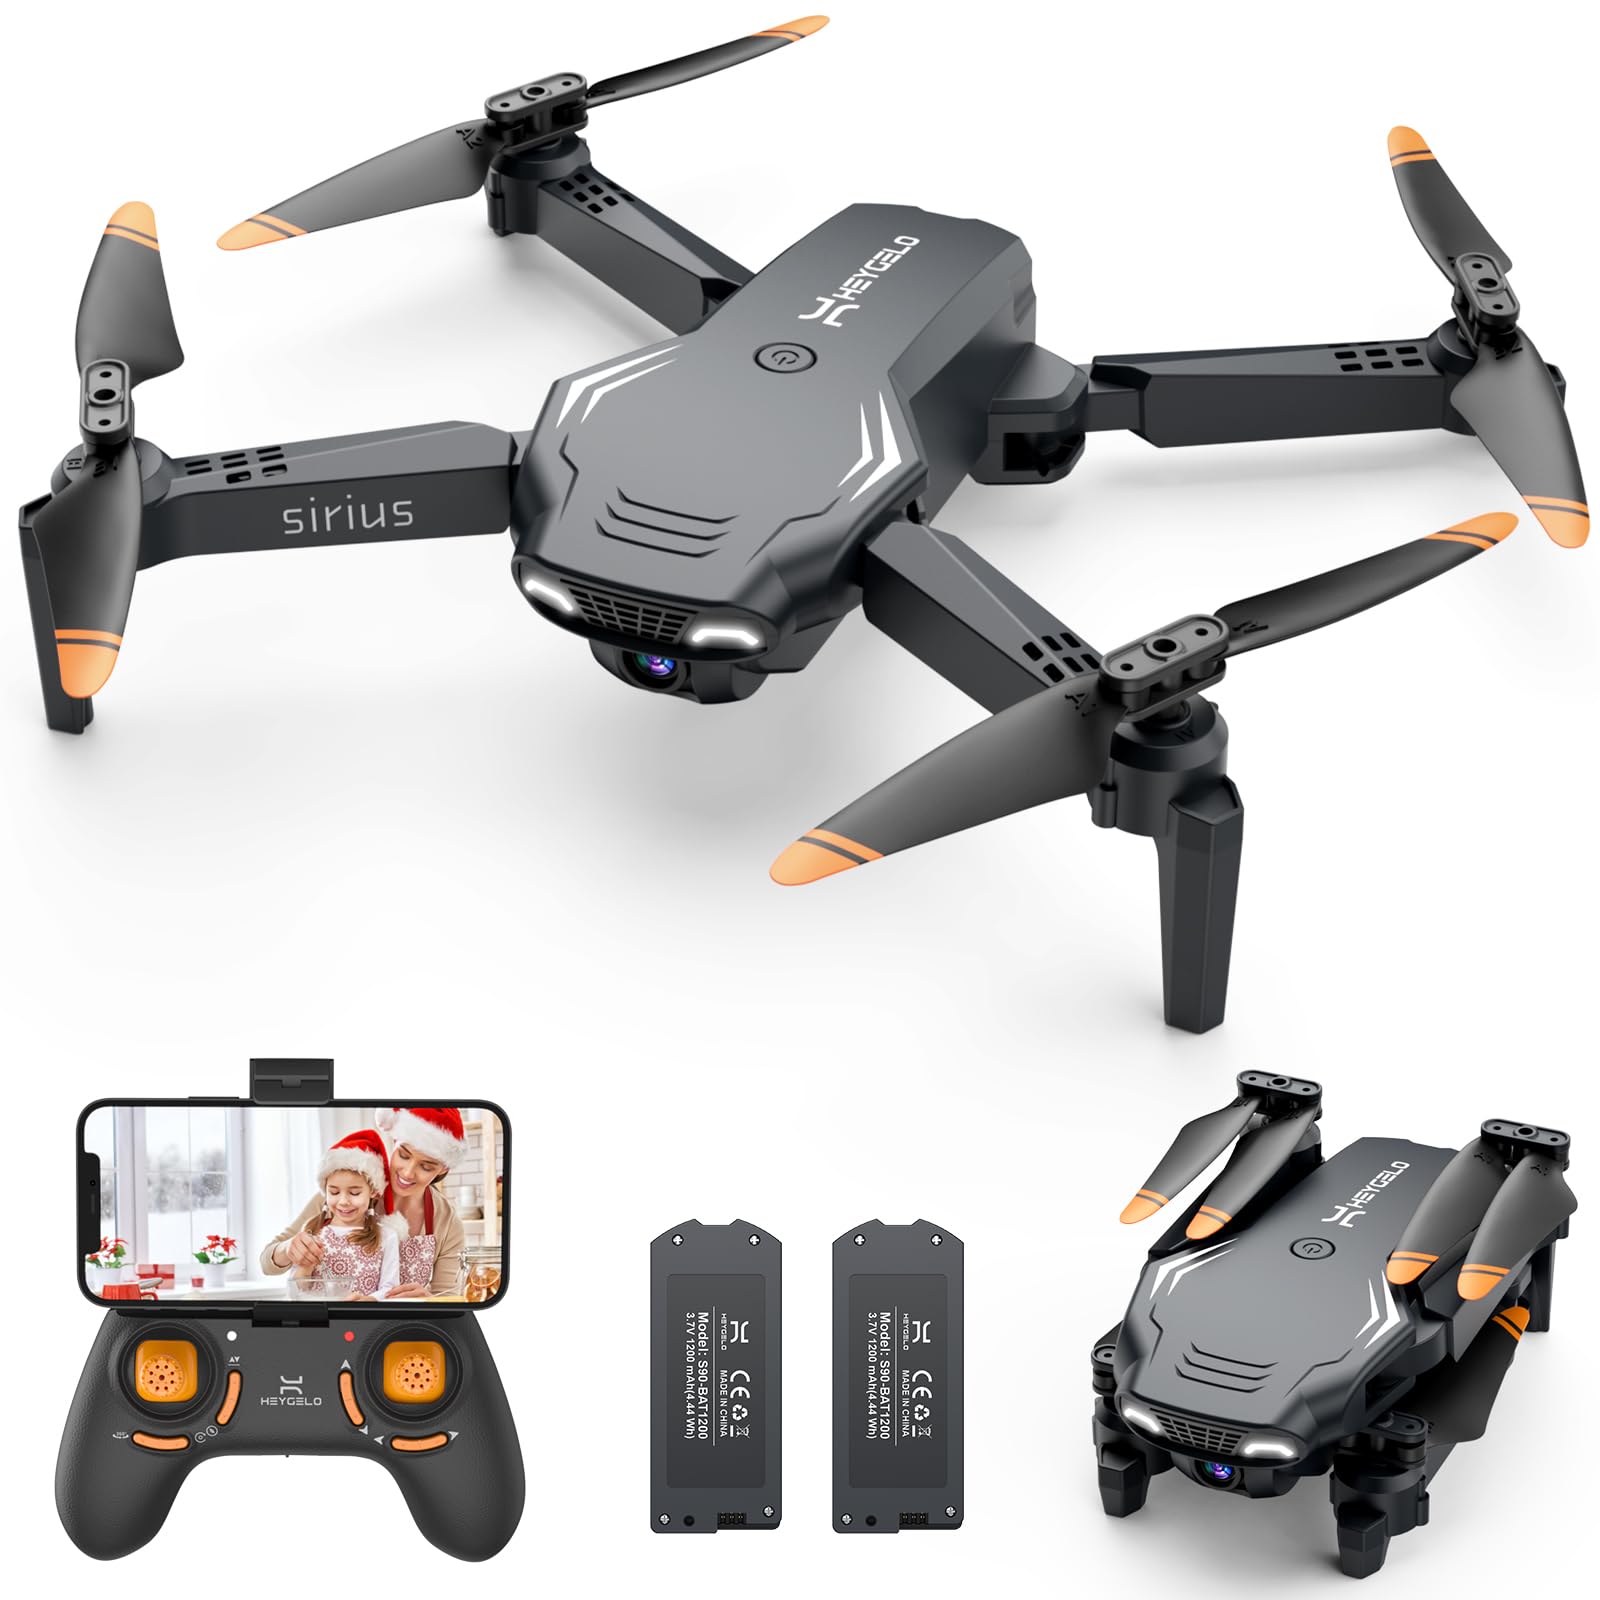 Heygelo S90 Drone with Camera for Adults, 1080P HD Mini FPV Drones for Kids Beginners, Foldable RC Quadcopter Toys Gifts with Altitude Hold, Voice/Gesture Control, 3 Speeds, 2 Batteries